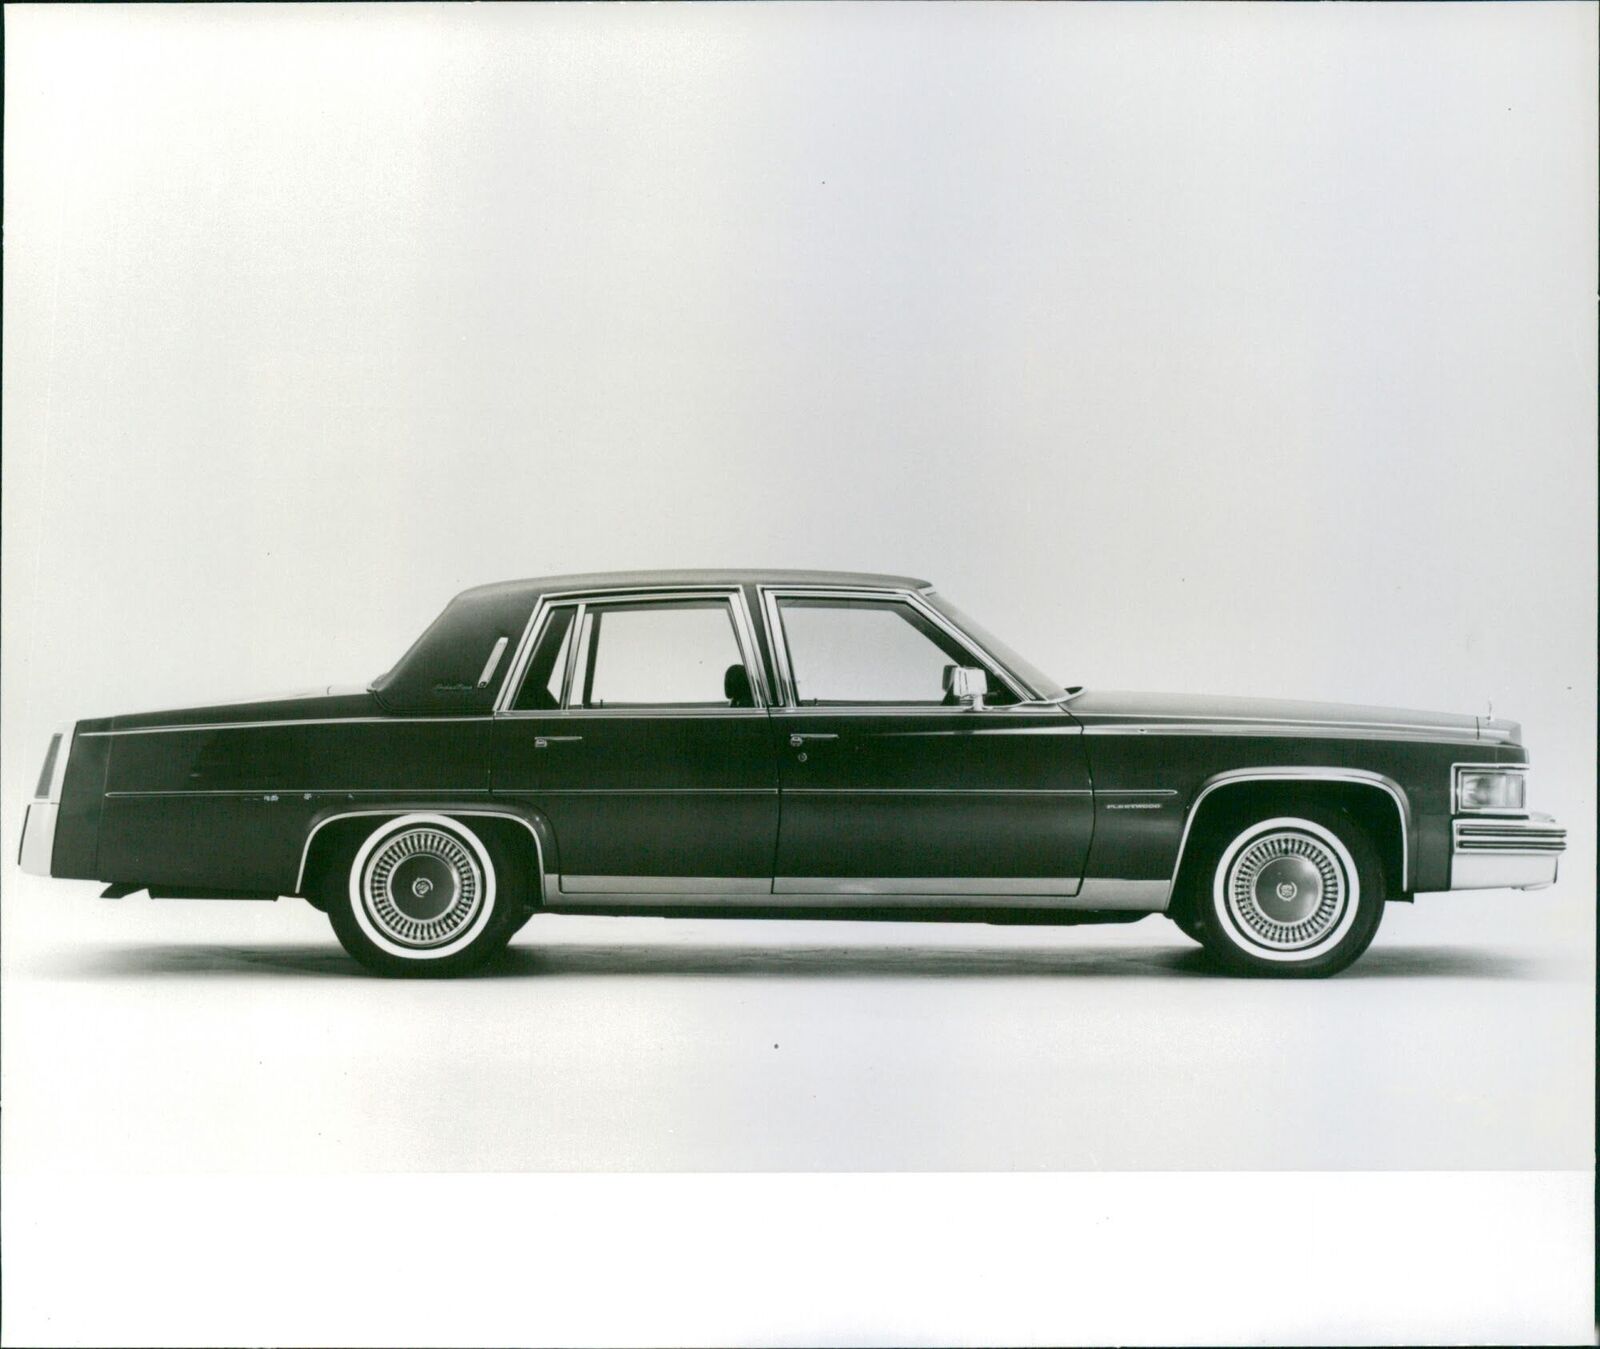 1976 Cadillac Fleetwood 60 Special Brougham - Vintage Photograph 3360554